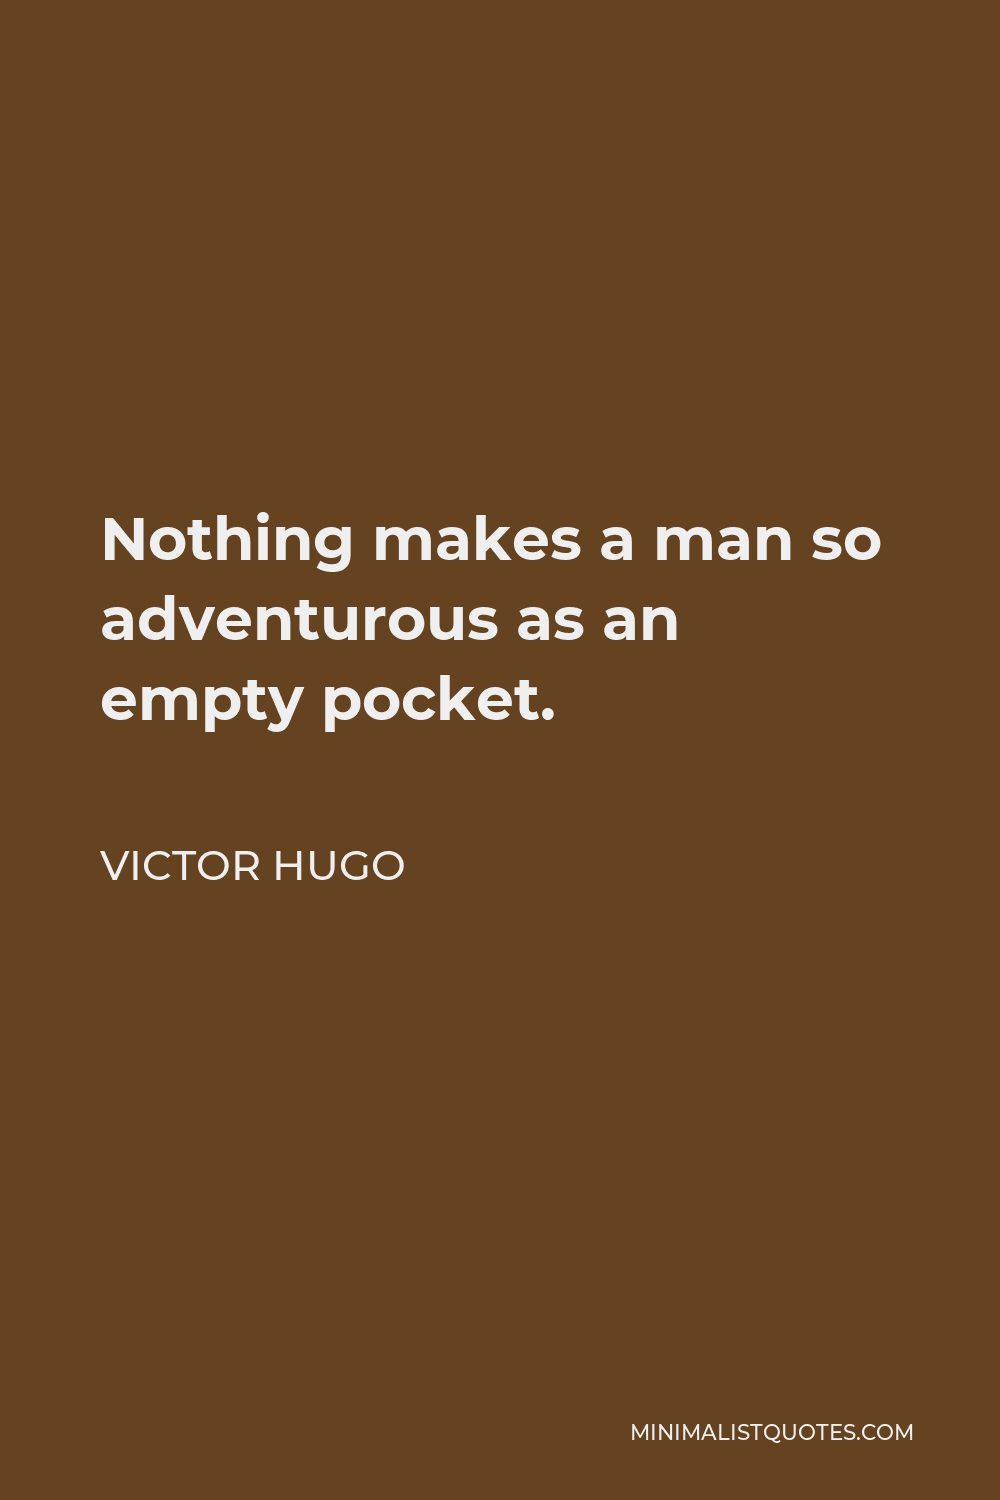 Victor Hugo Quote - Nothing makes a man so adventurous as an empty pocket.